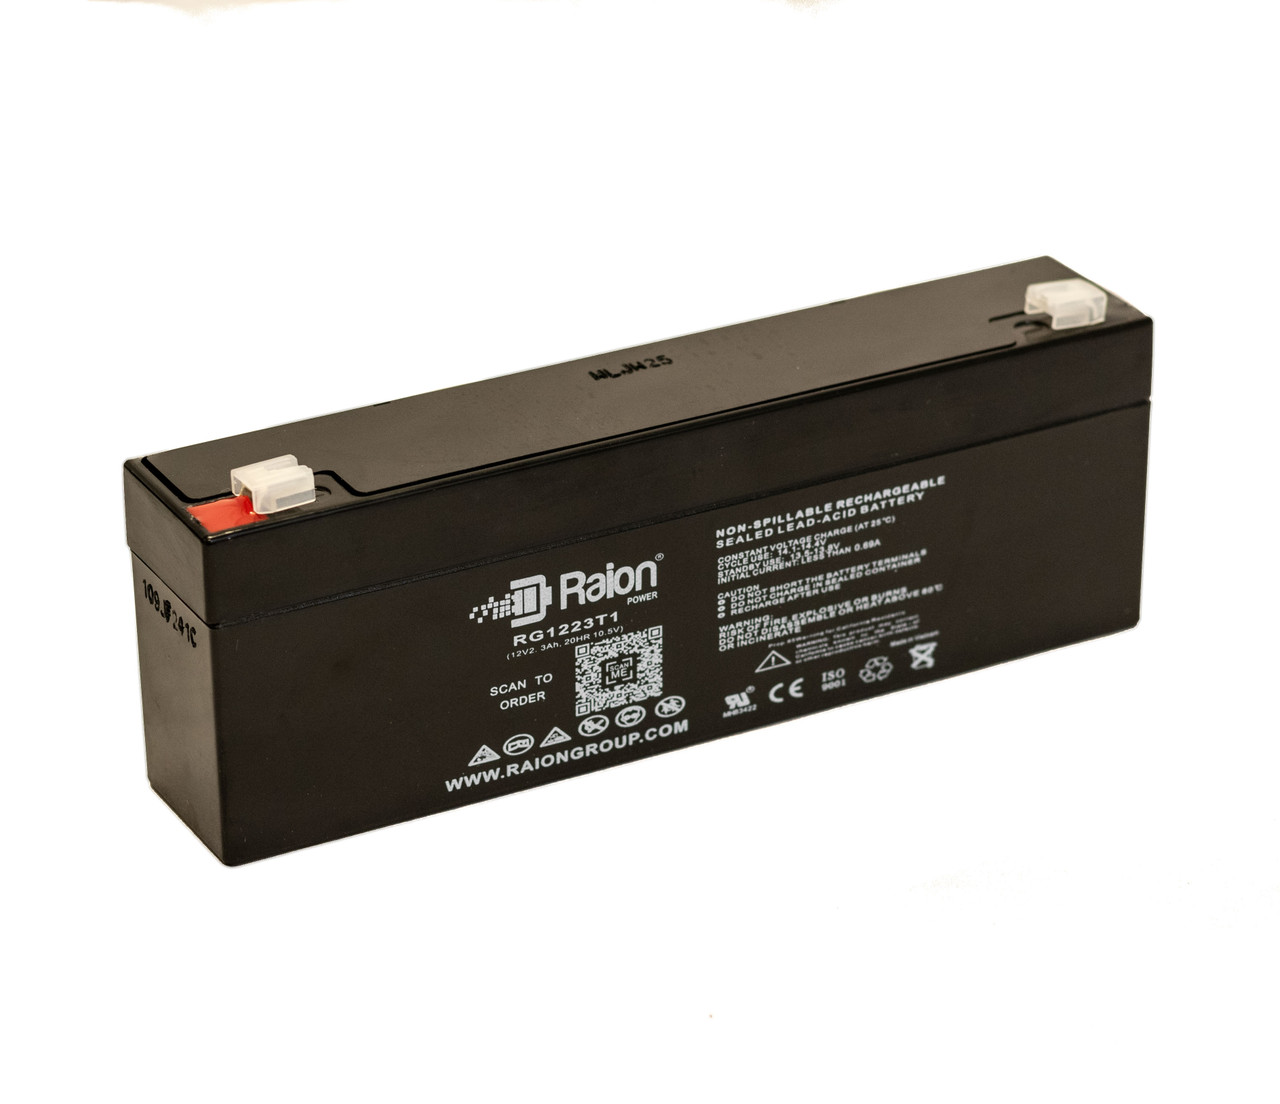 Raion Power RG1223T1 Replacement Battery for Sentry PM1223